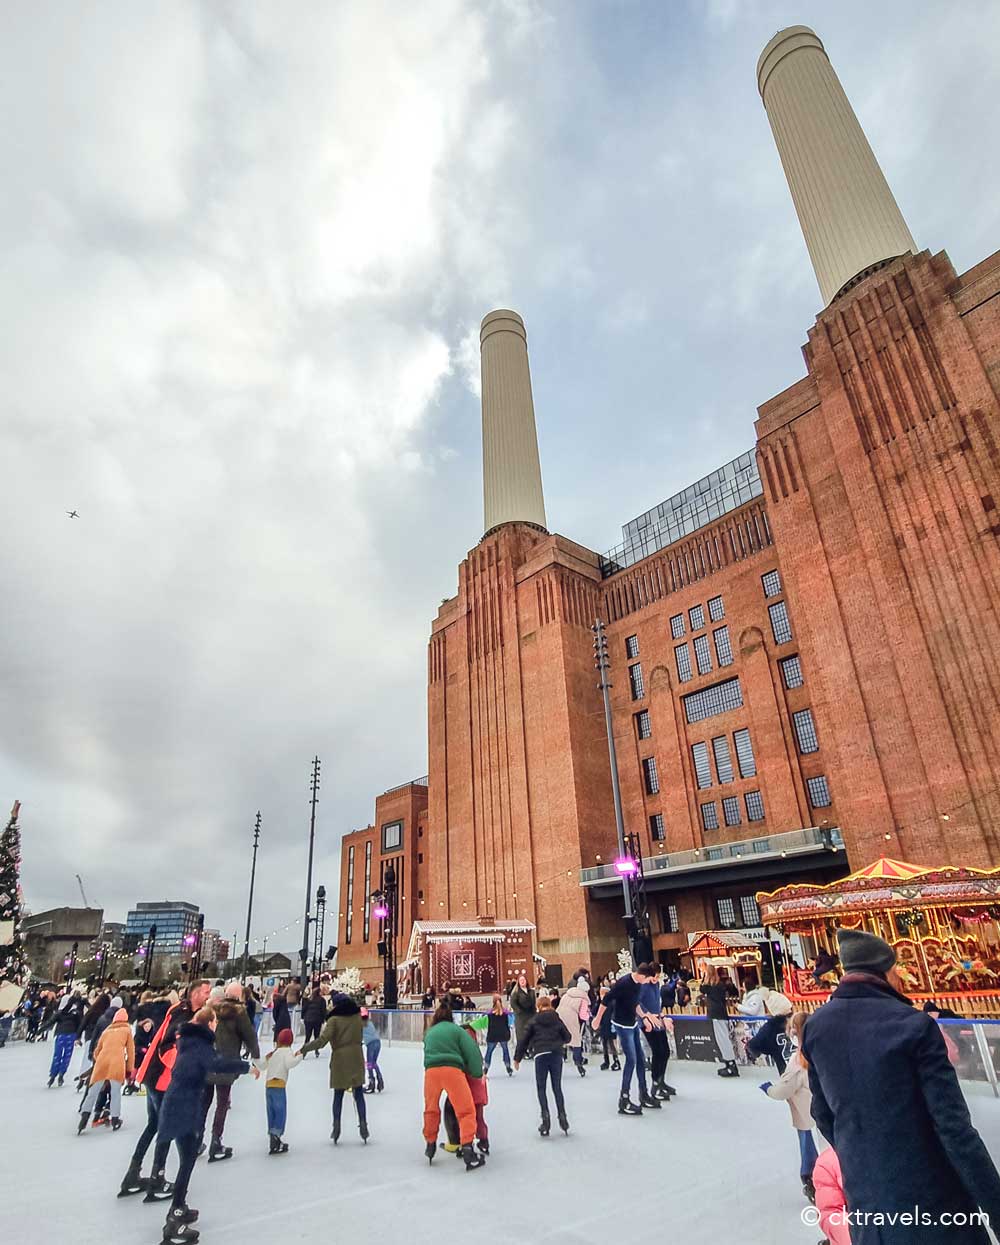 Glide at Battersea Power Station ice skating